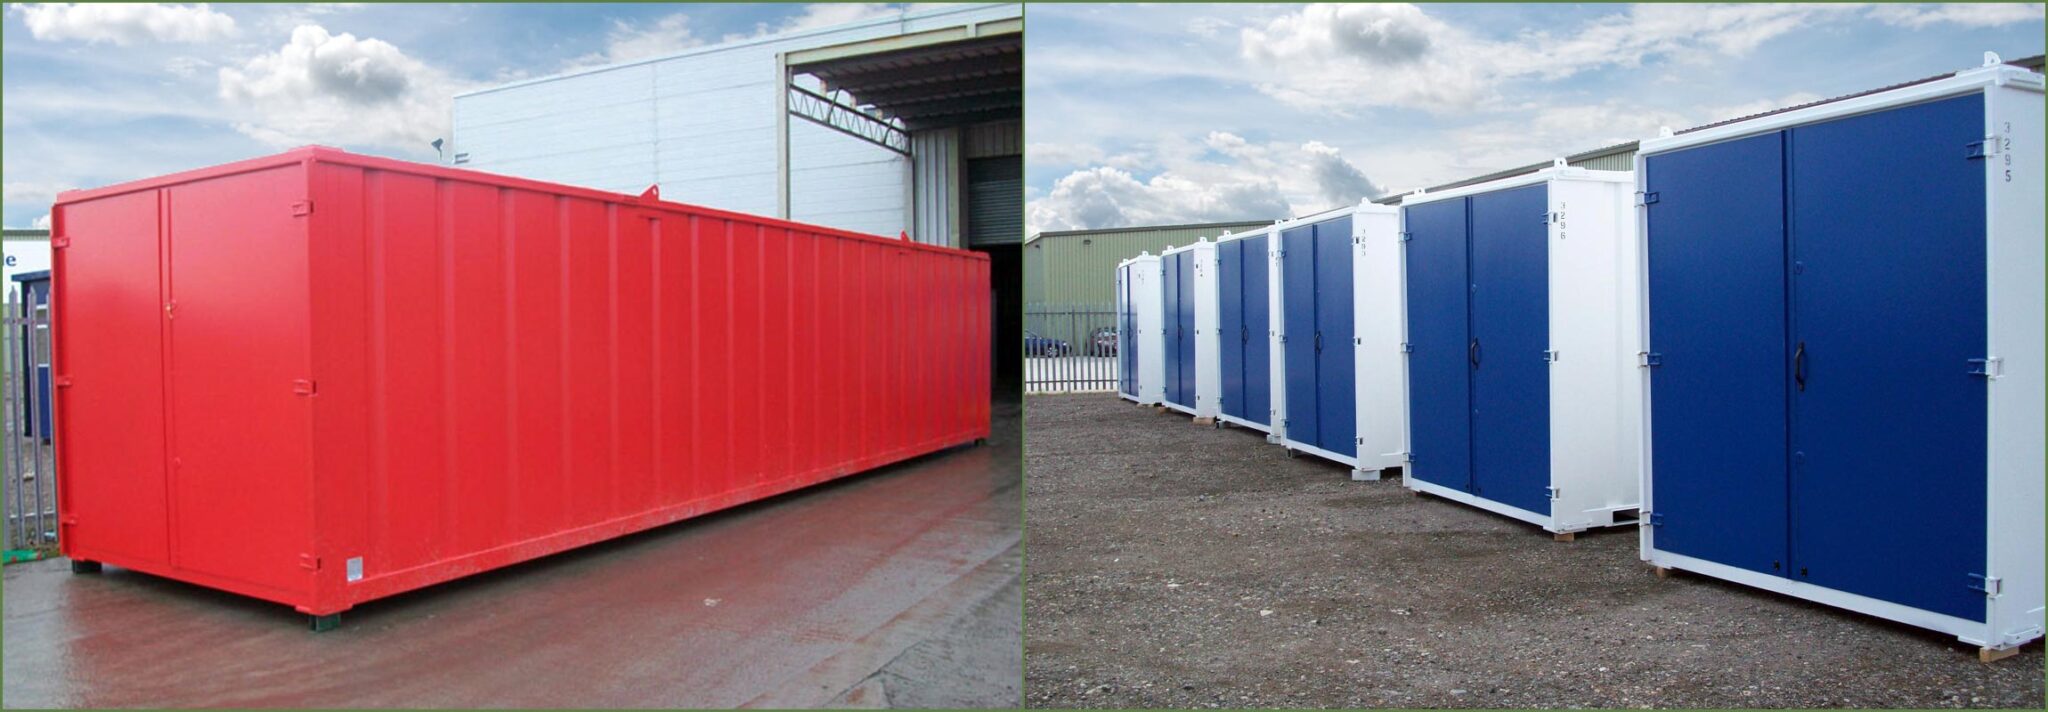 UK Providers of Secure Steel Container Buildings